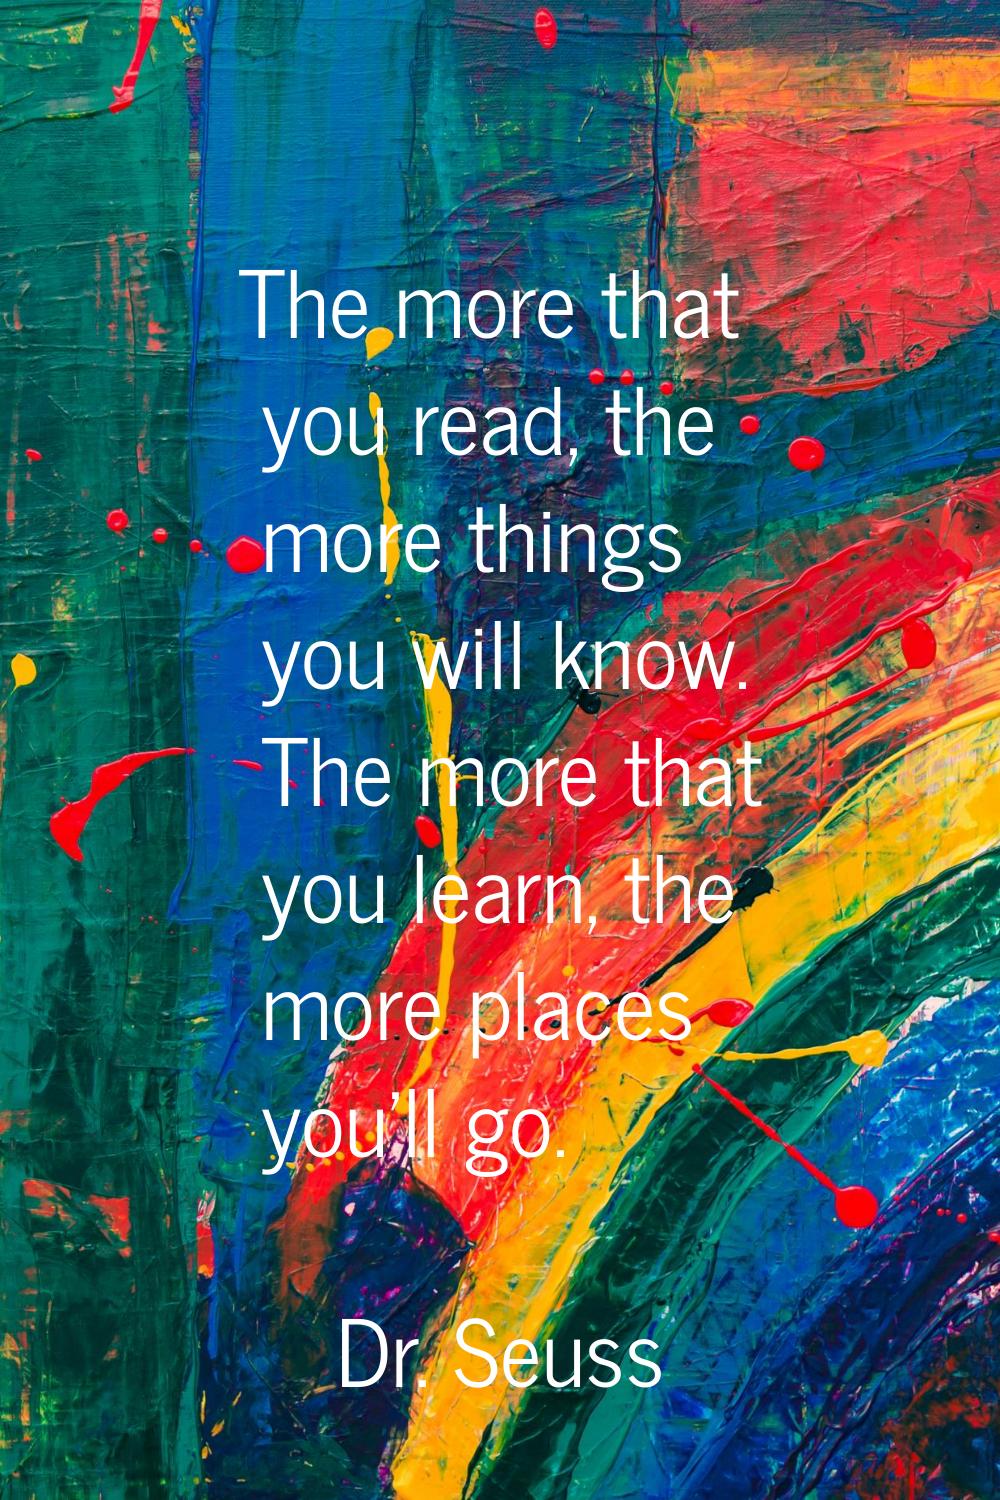 The more that you read, the more things you will know. The more that you learn, the more places you